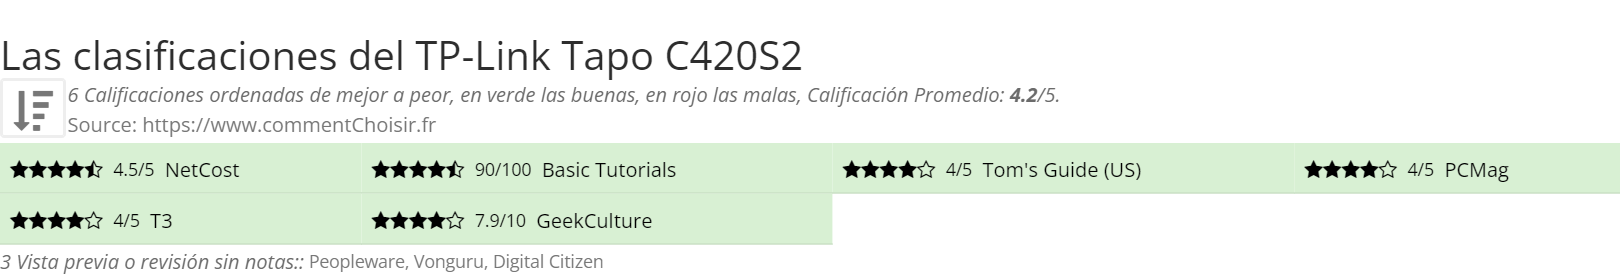 Ratings TP-Link Tapo C420S2